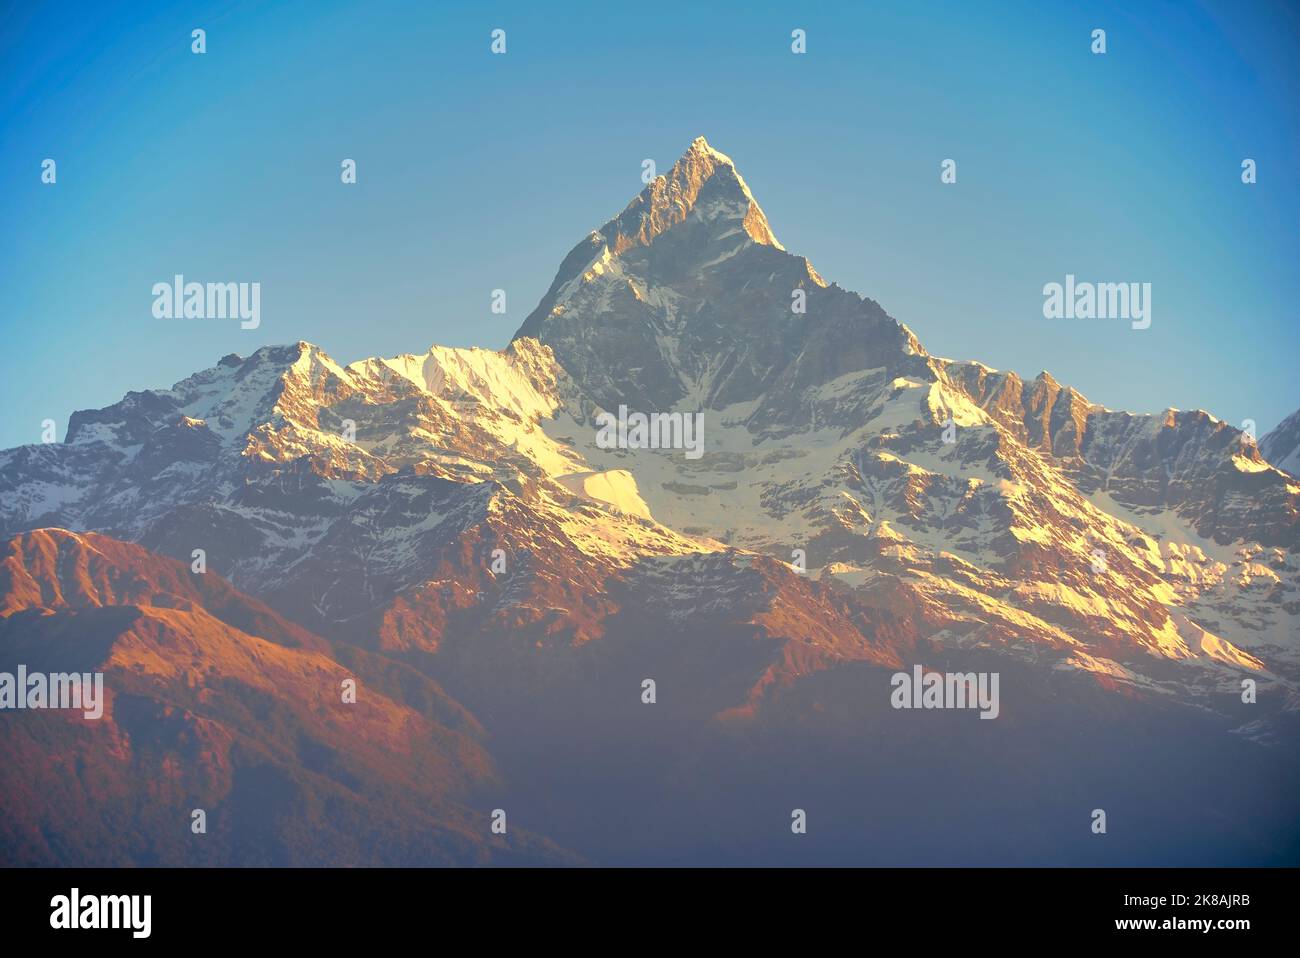 Isolated Fishtail Mountain Peak or the sacred Machey Pucharey in Nepal Stock Photo